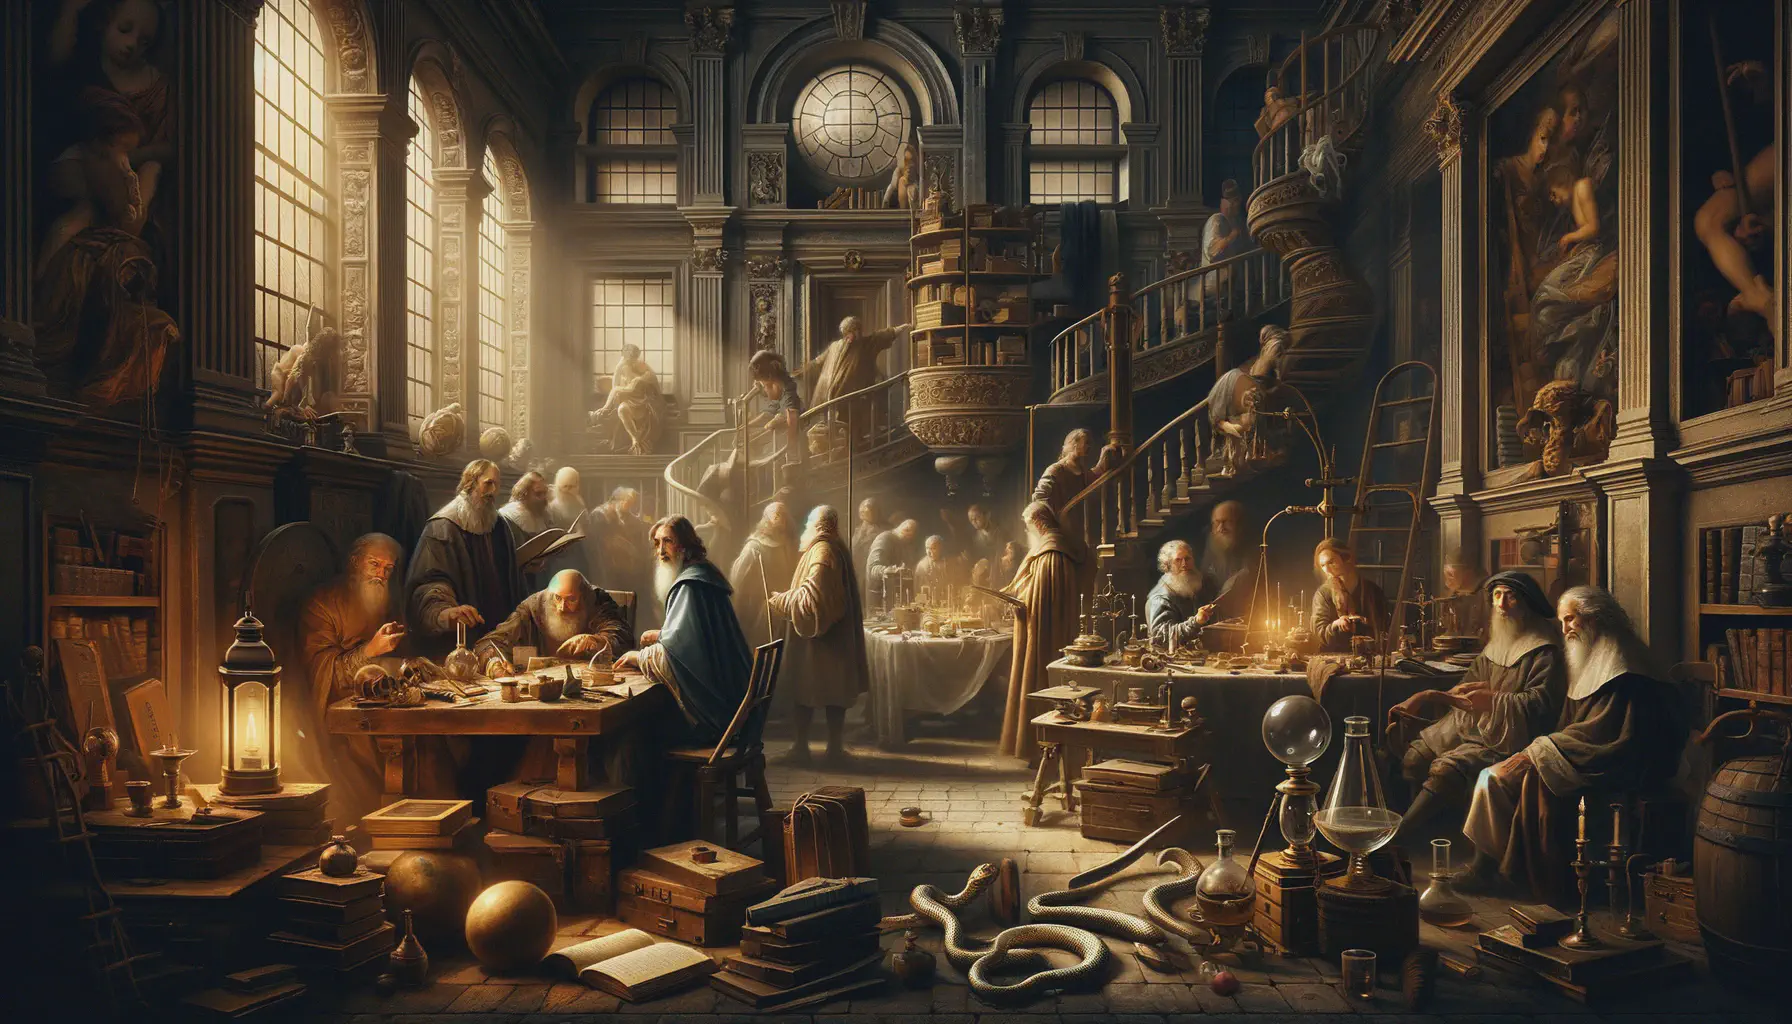 Intellectuals at work in a Baroque style.